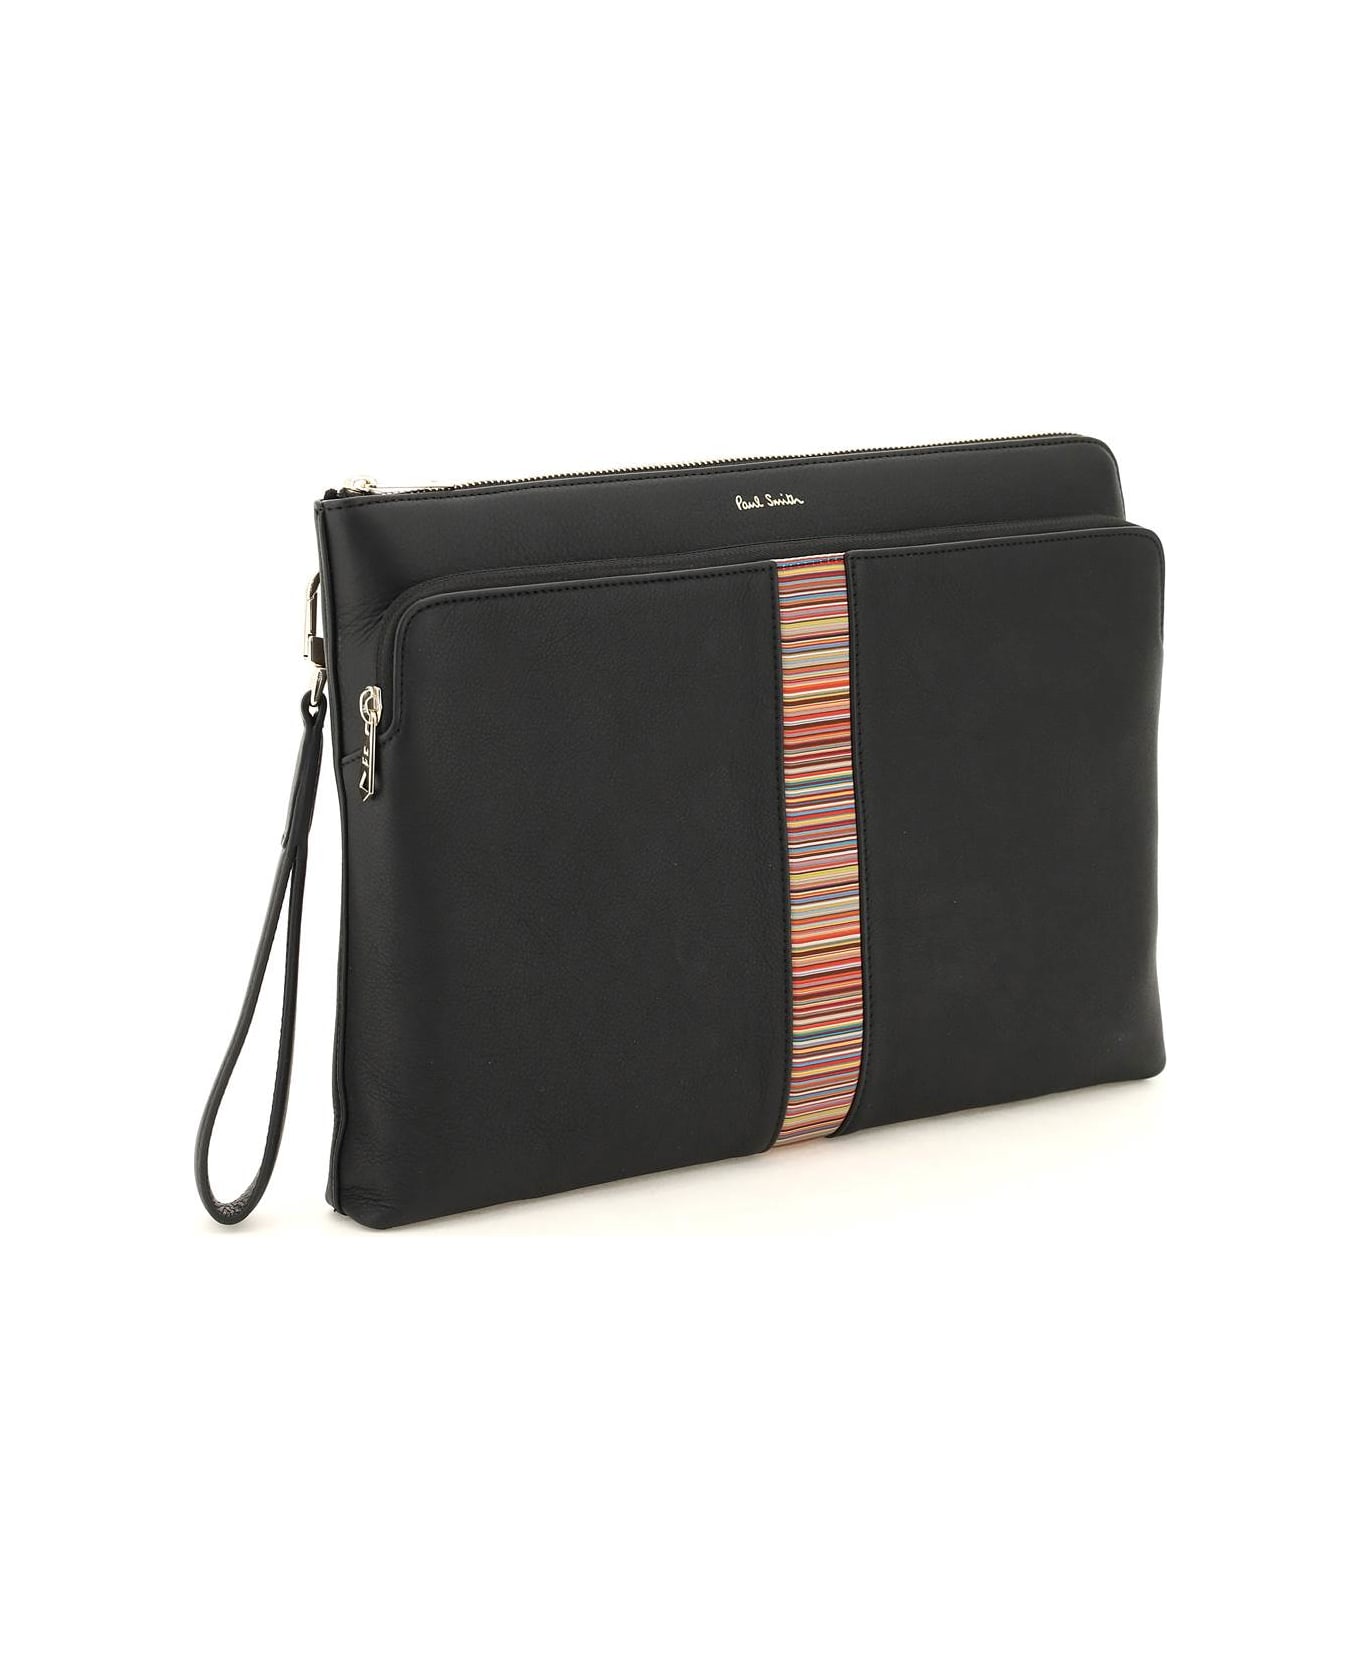 Paul Smith Leather Document Case Luggage - BLACK トラベルバッグ